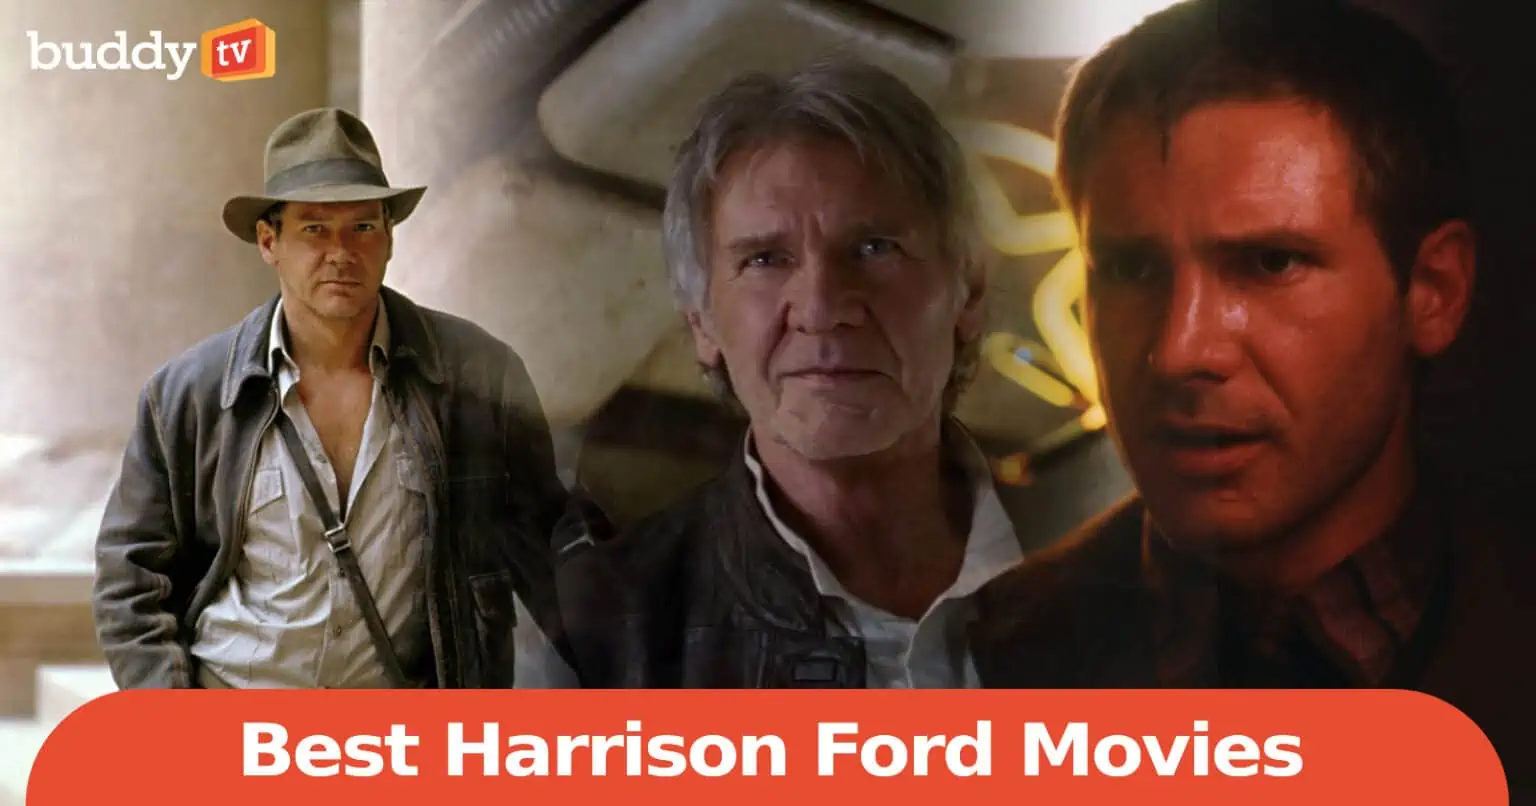 10 Best Harrison Ford Movies, Ranked by Viewers - BuddyTV